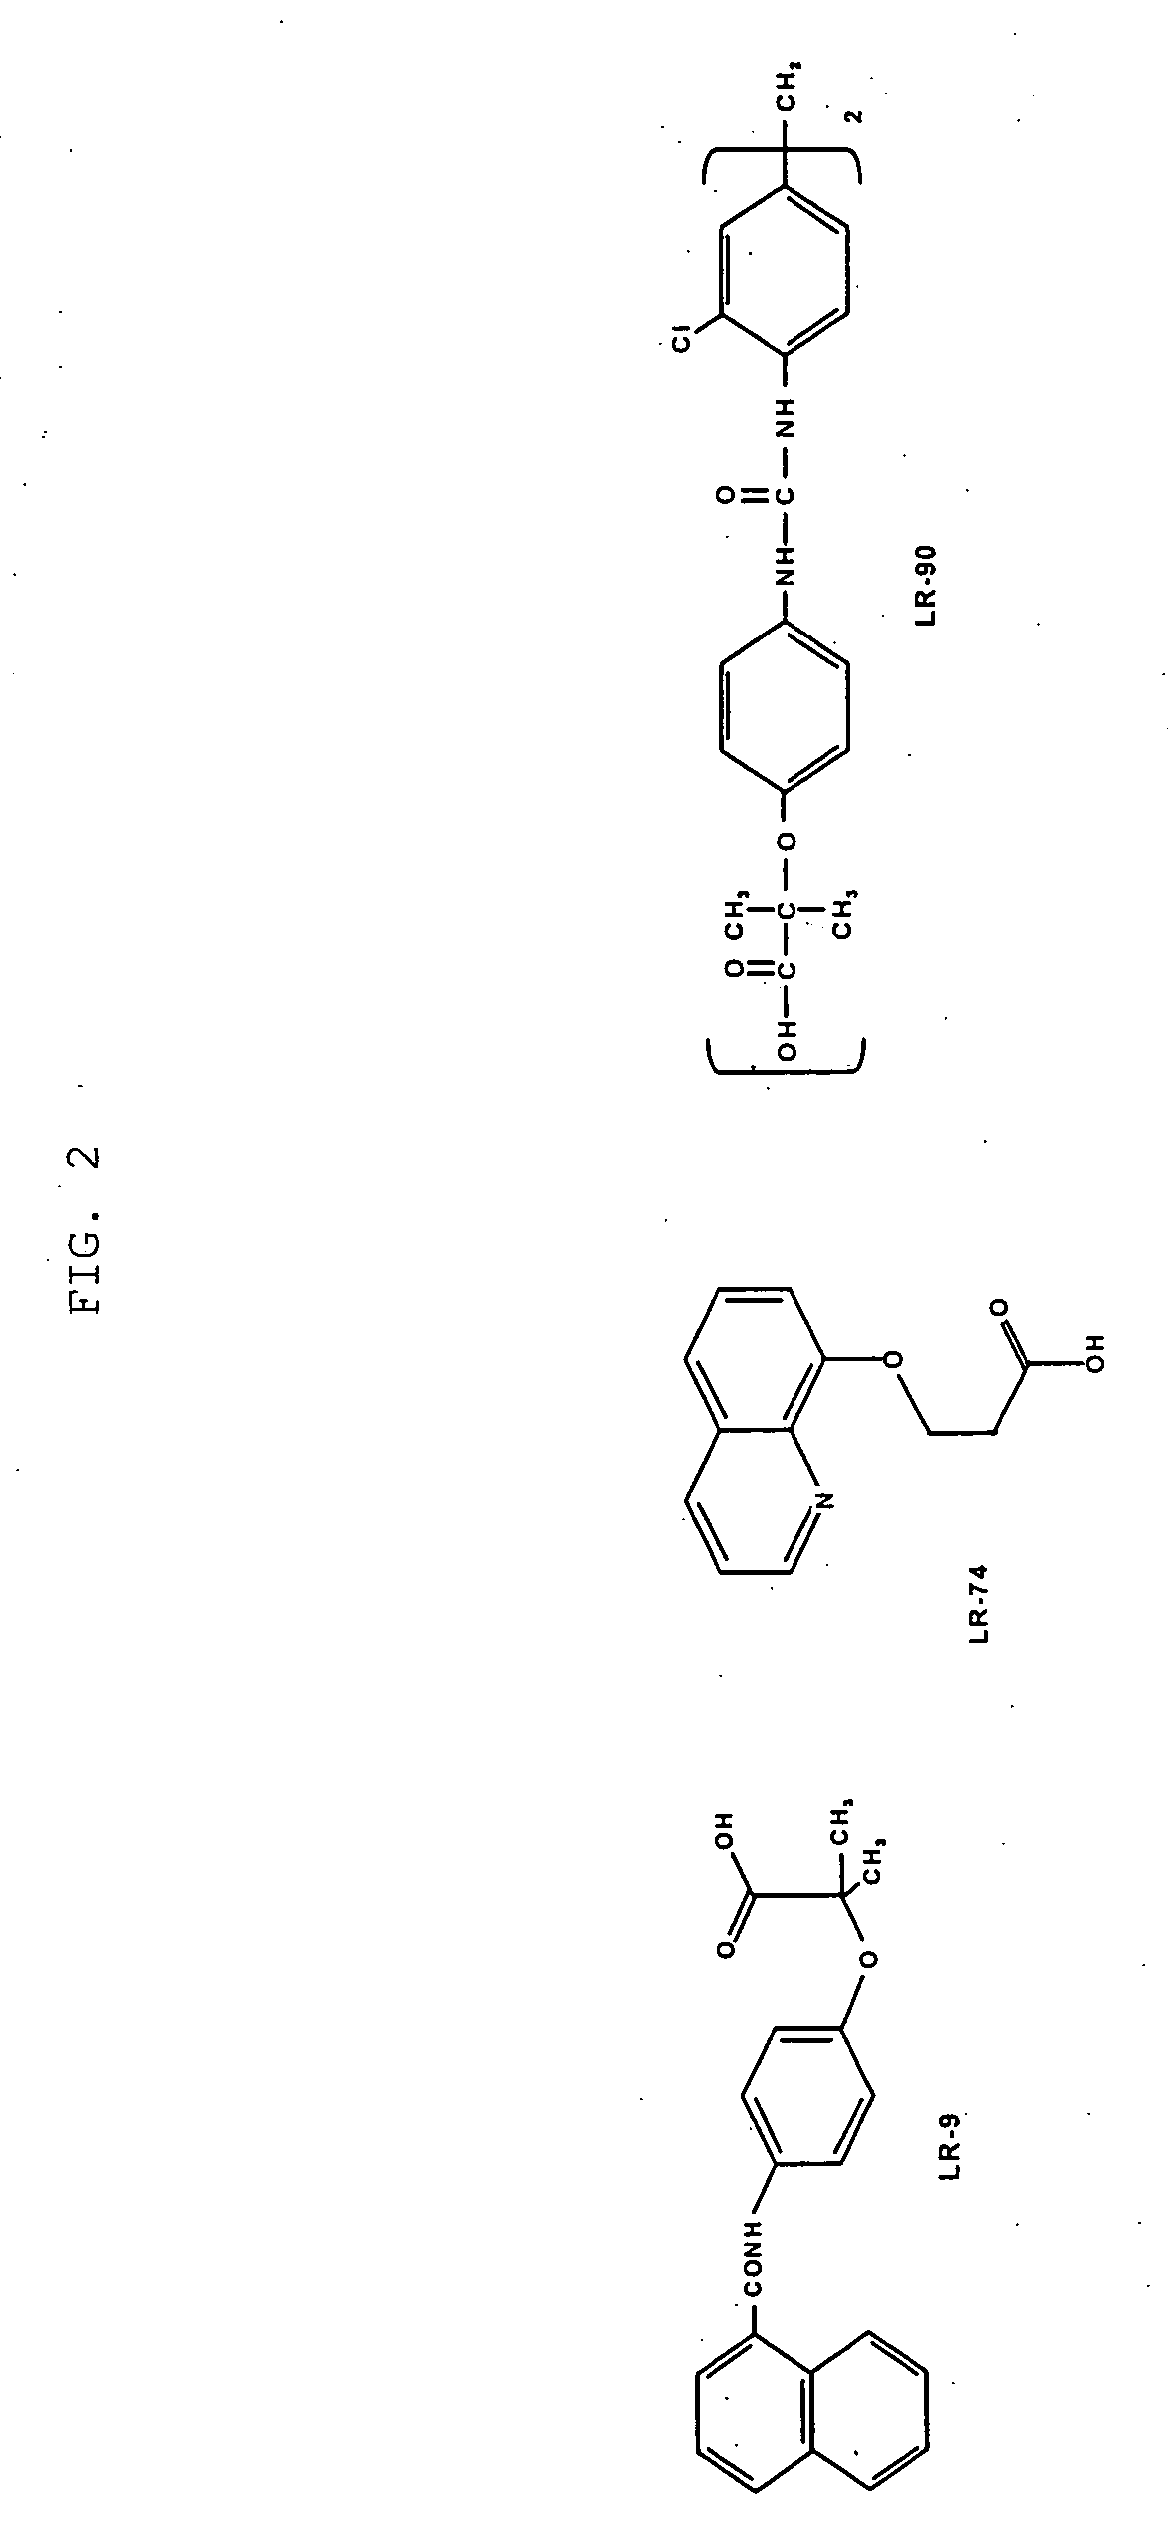 Methods of lowering lipid levels in a mammal